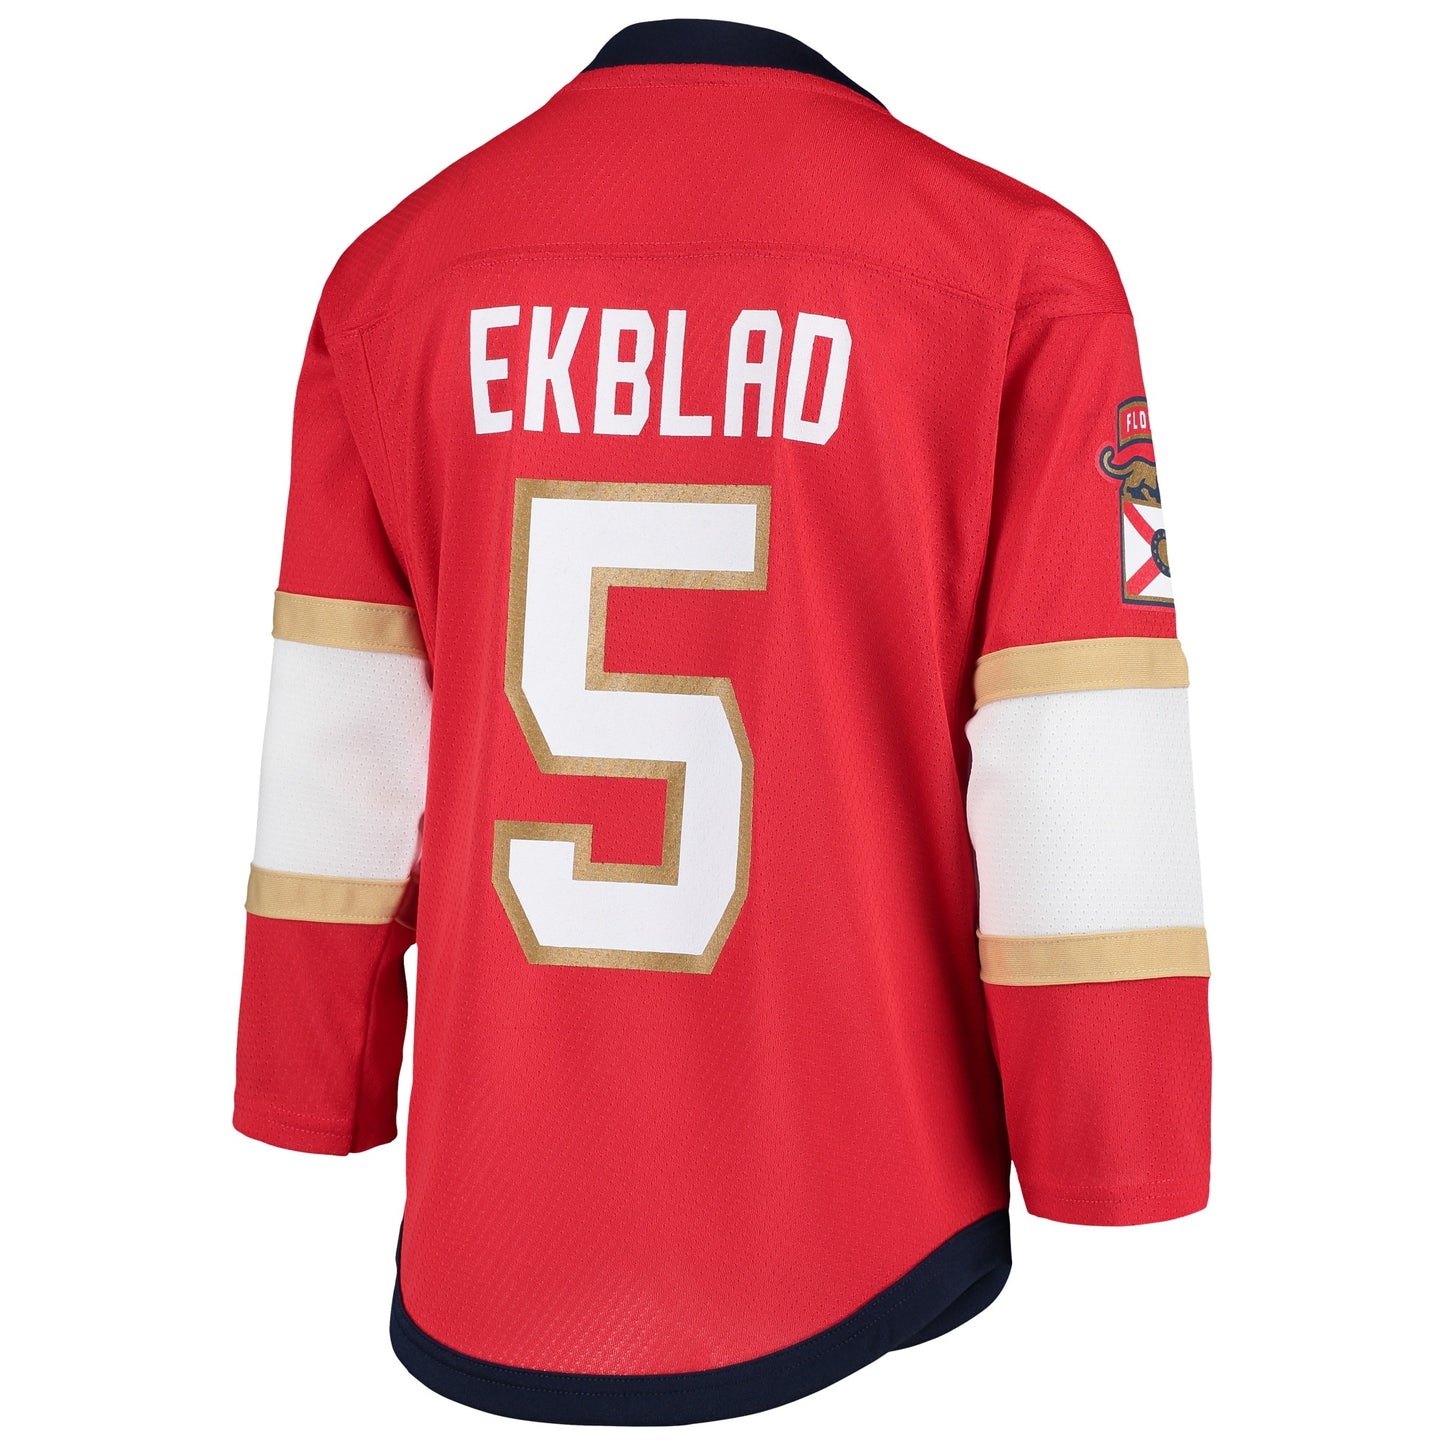 Aaron Ekblad Florida Panthers Youth Home Replica Player Jersey - Red